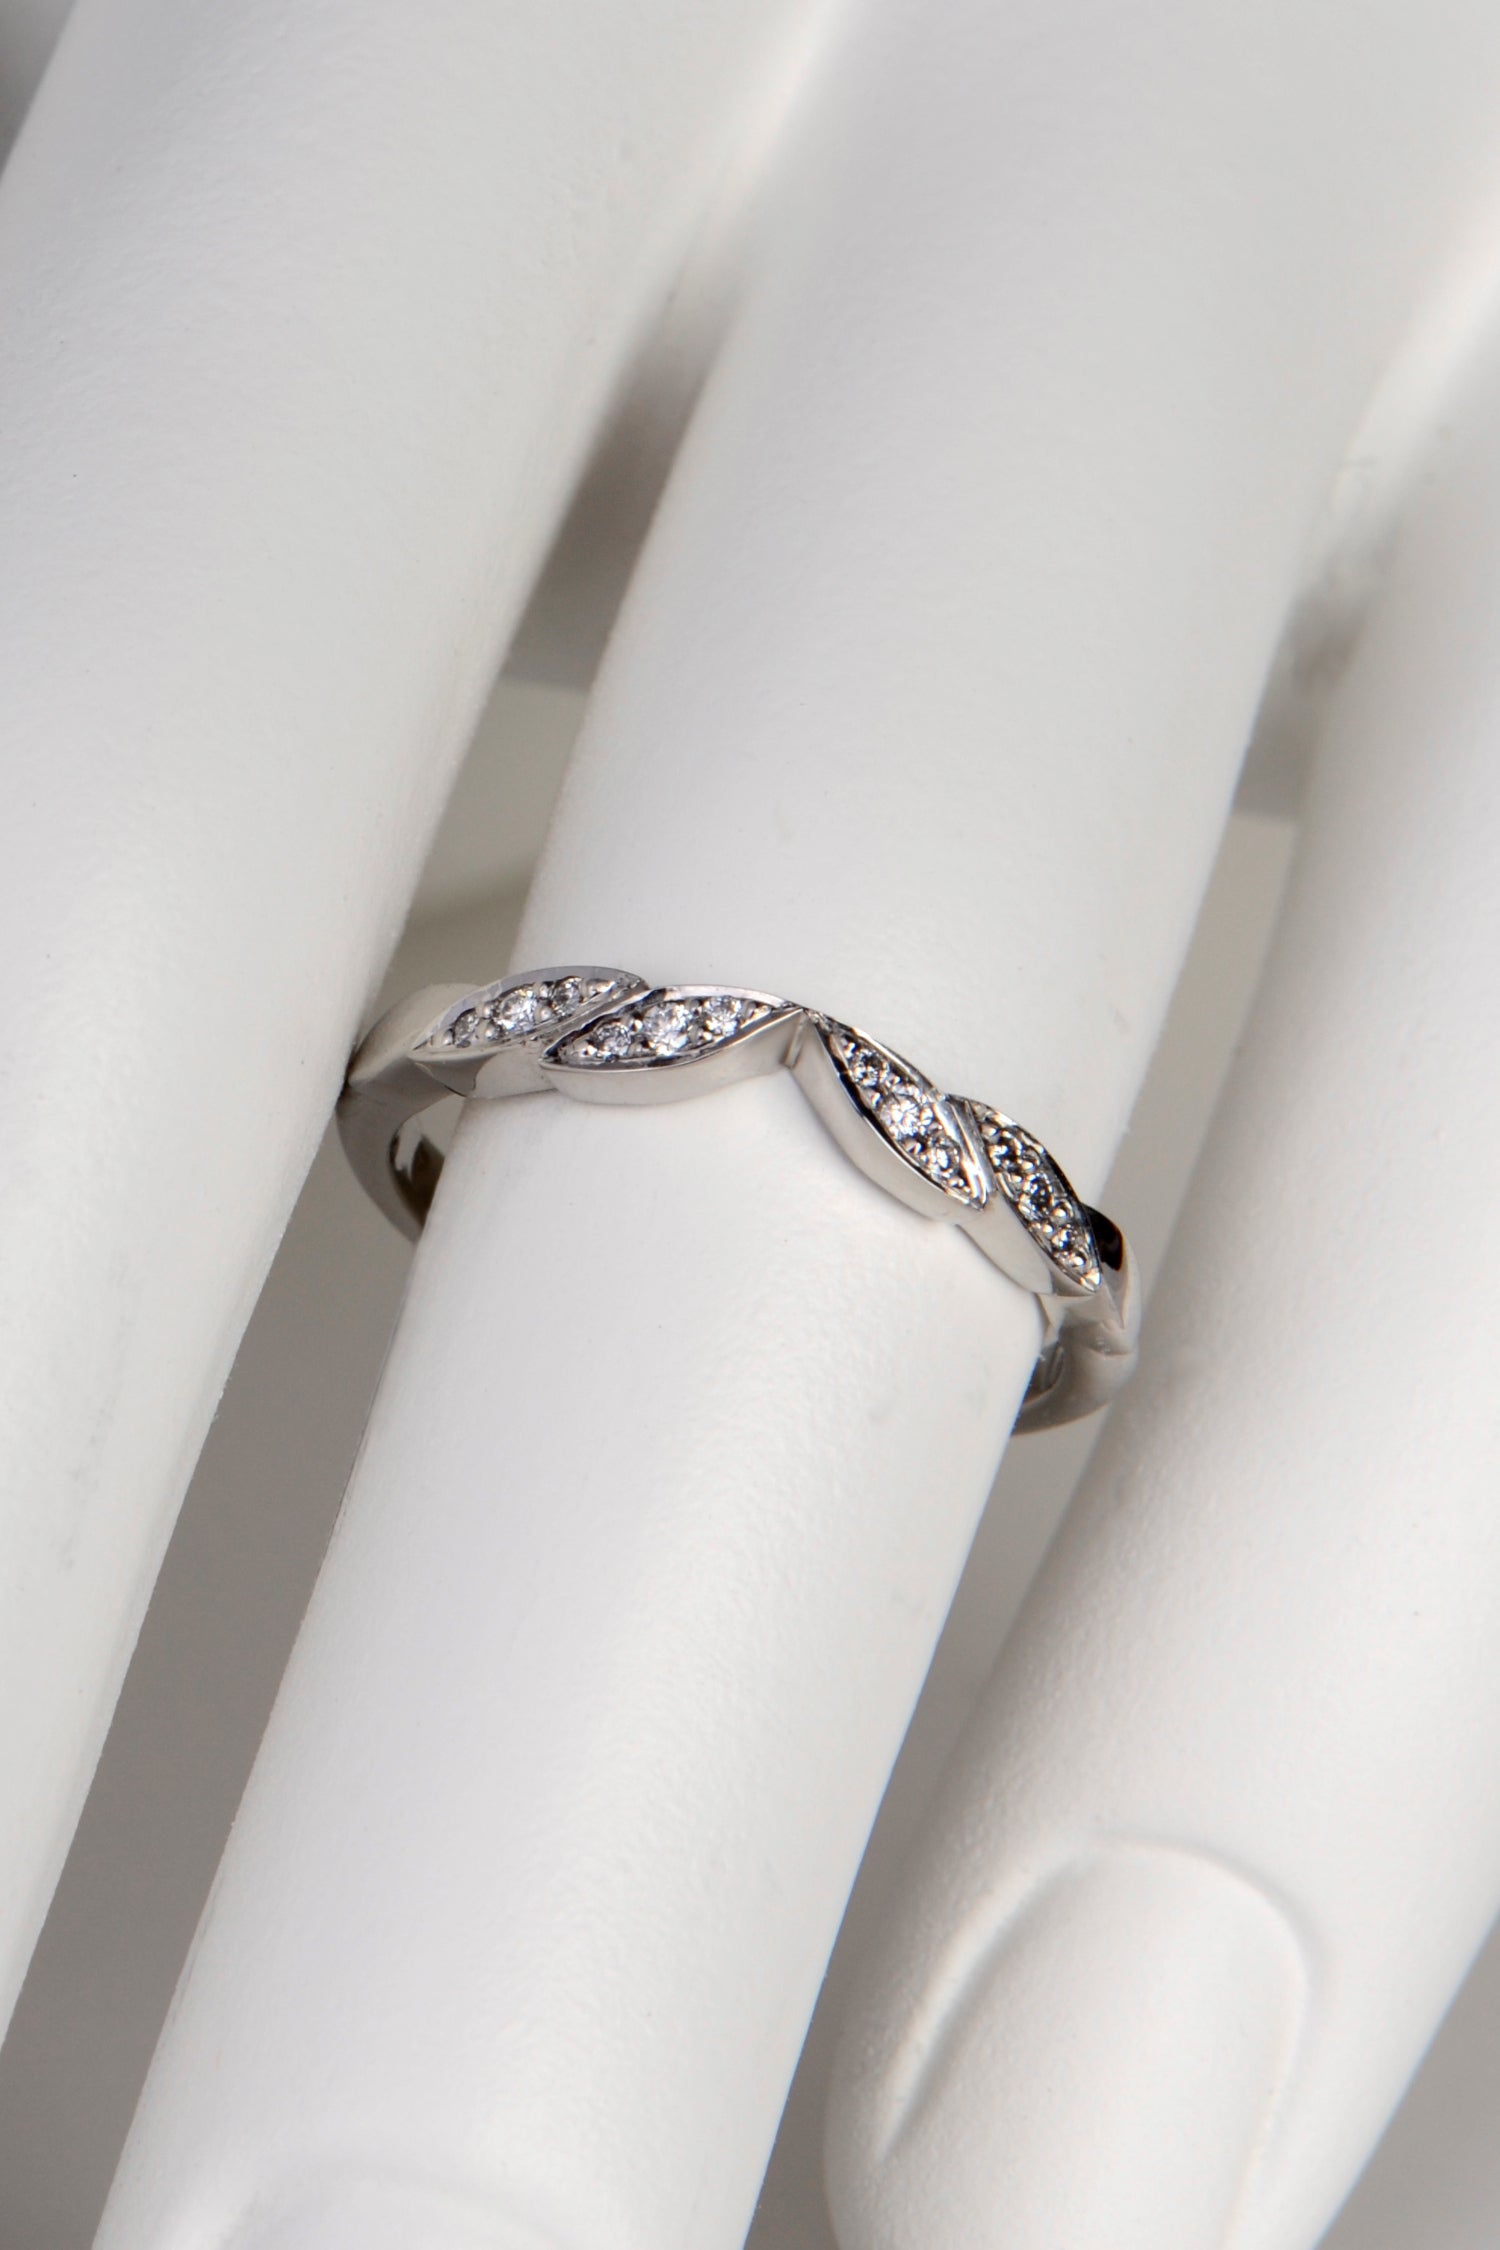 handmade platinum ring with a V shaped dip at the front created by four leaf shaped details set with diamonds. The V shape allows an engagement ring to slot into the space at the front.